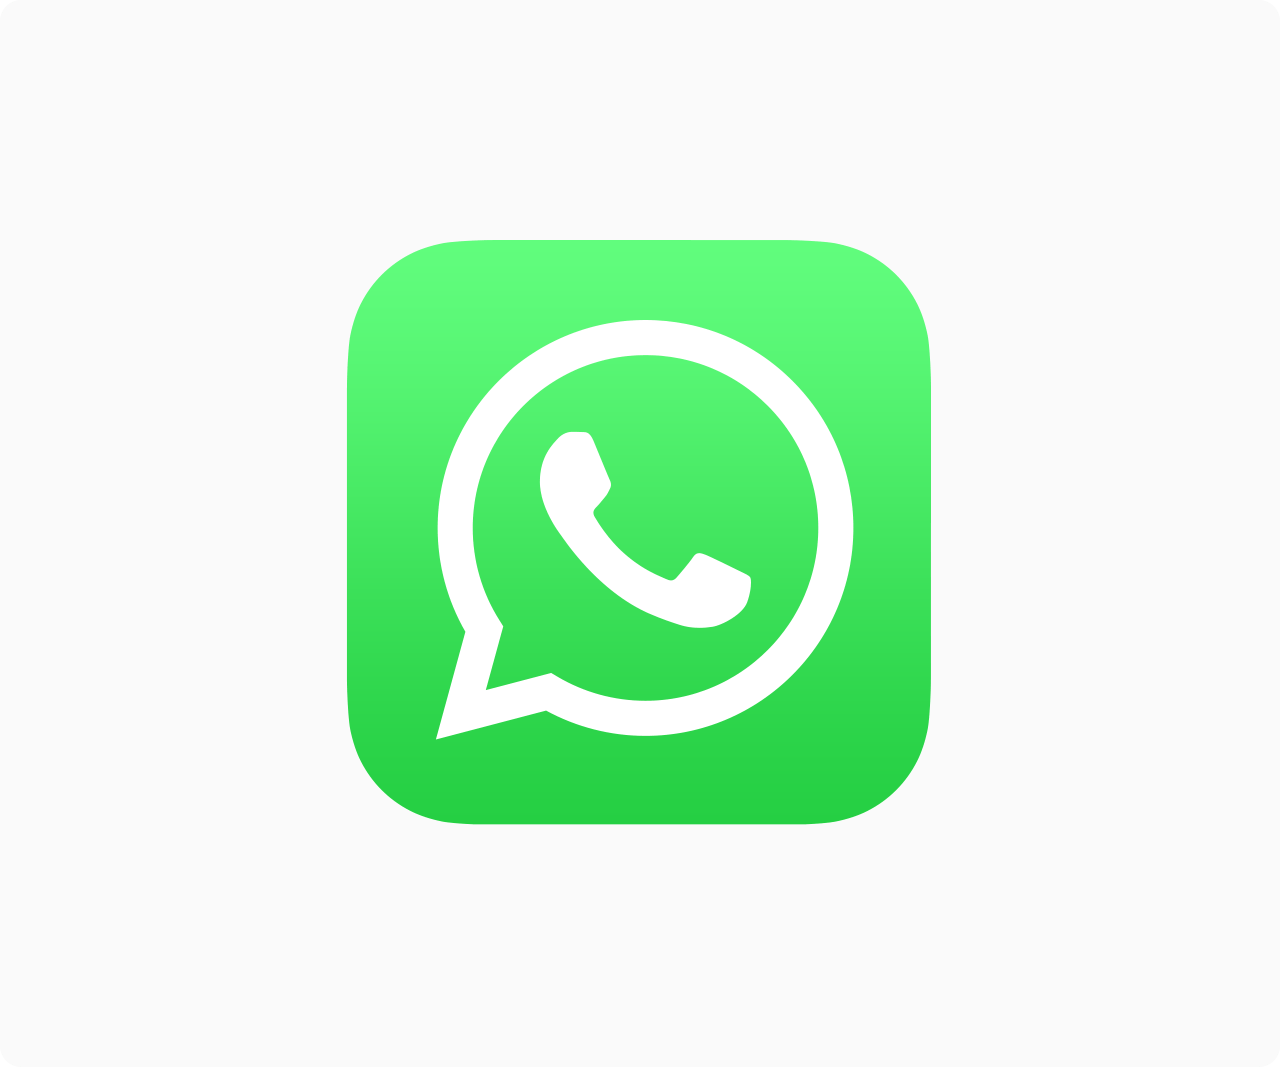 Green and White Square Logo - WhatsApp Brand Resources